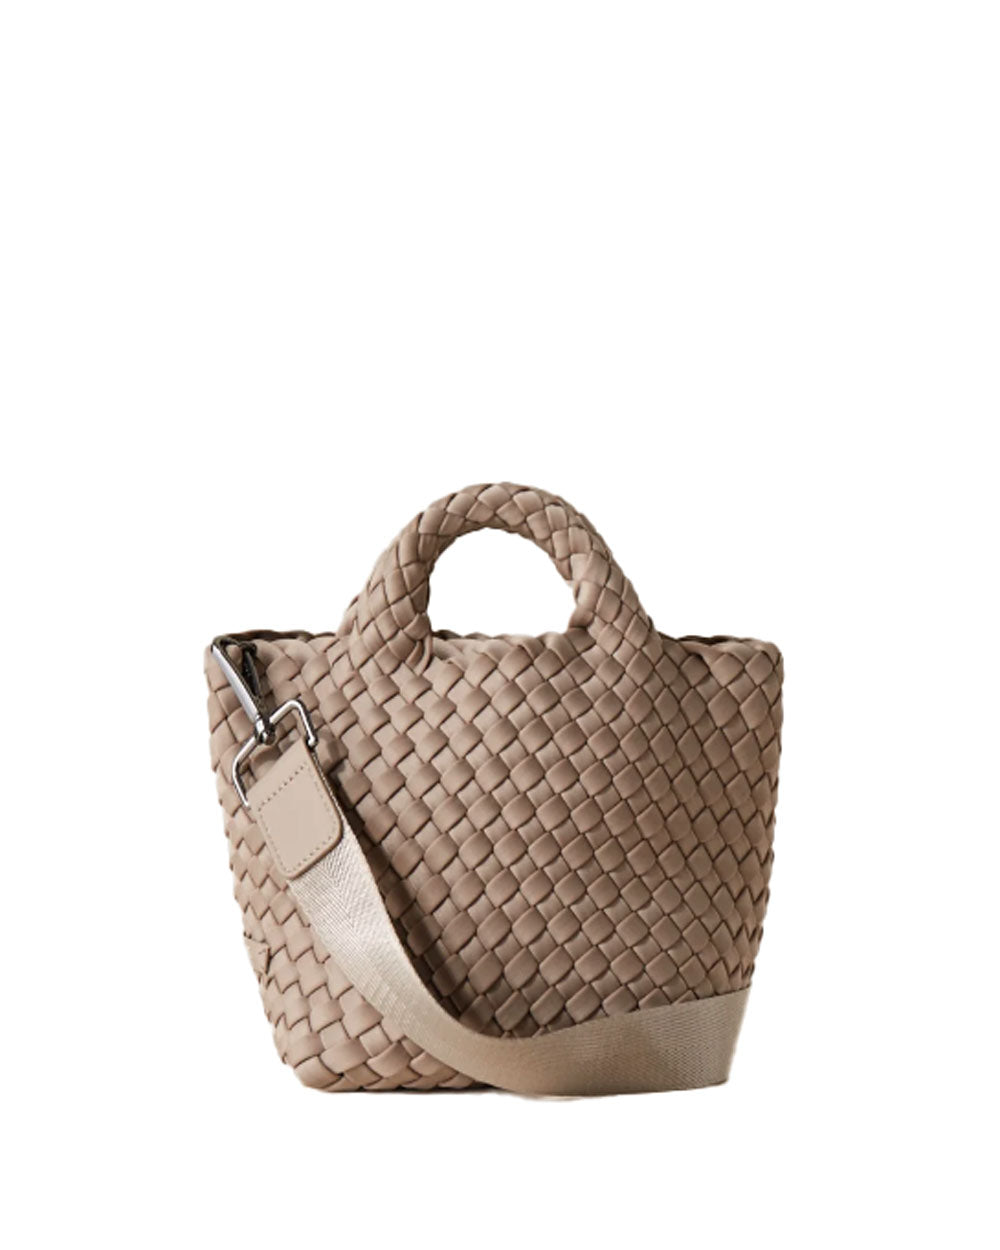 St. Barths Petite Tote in Cashmere